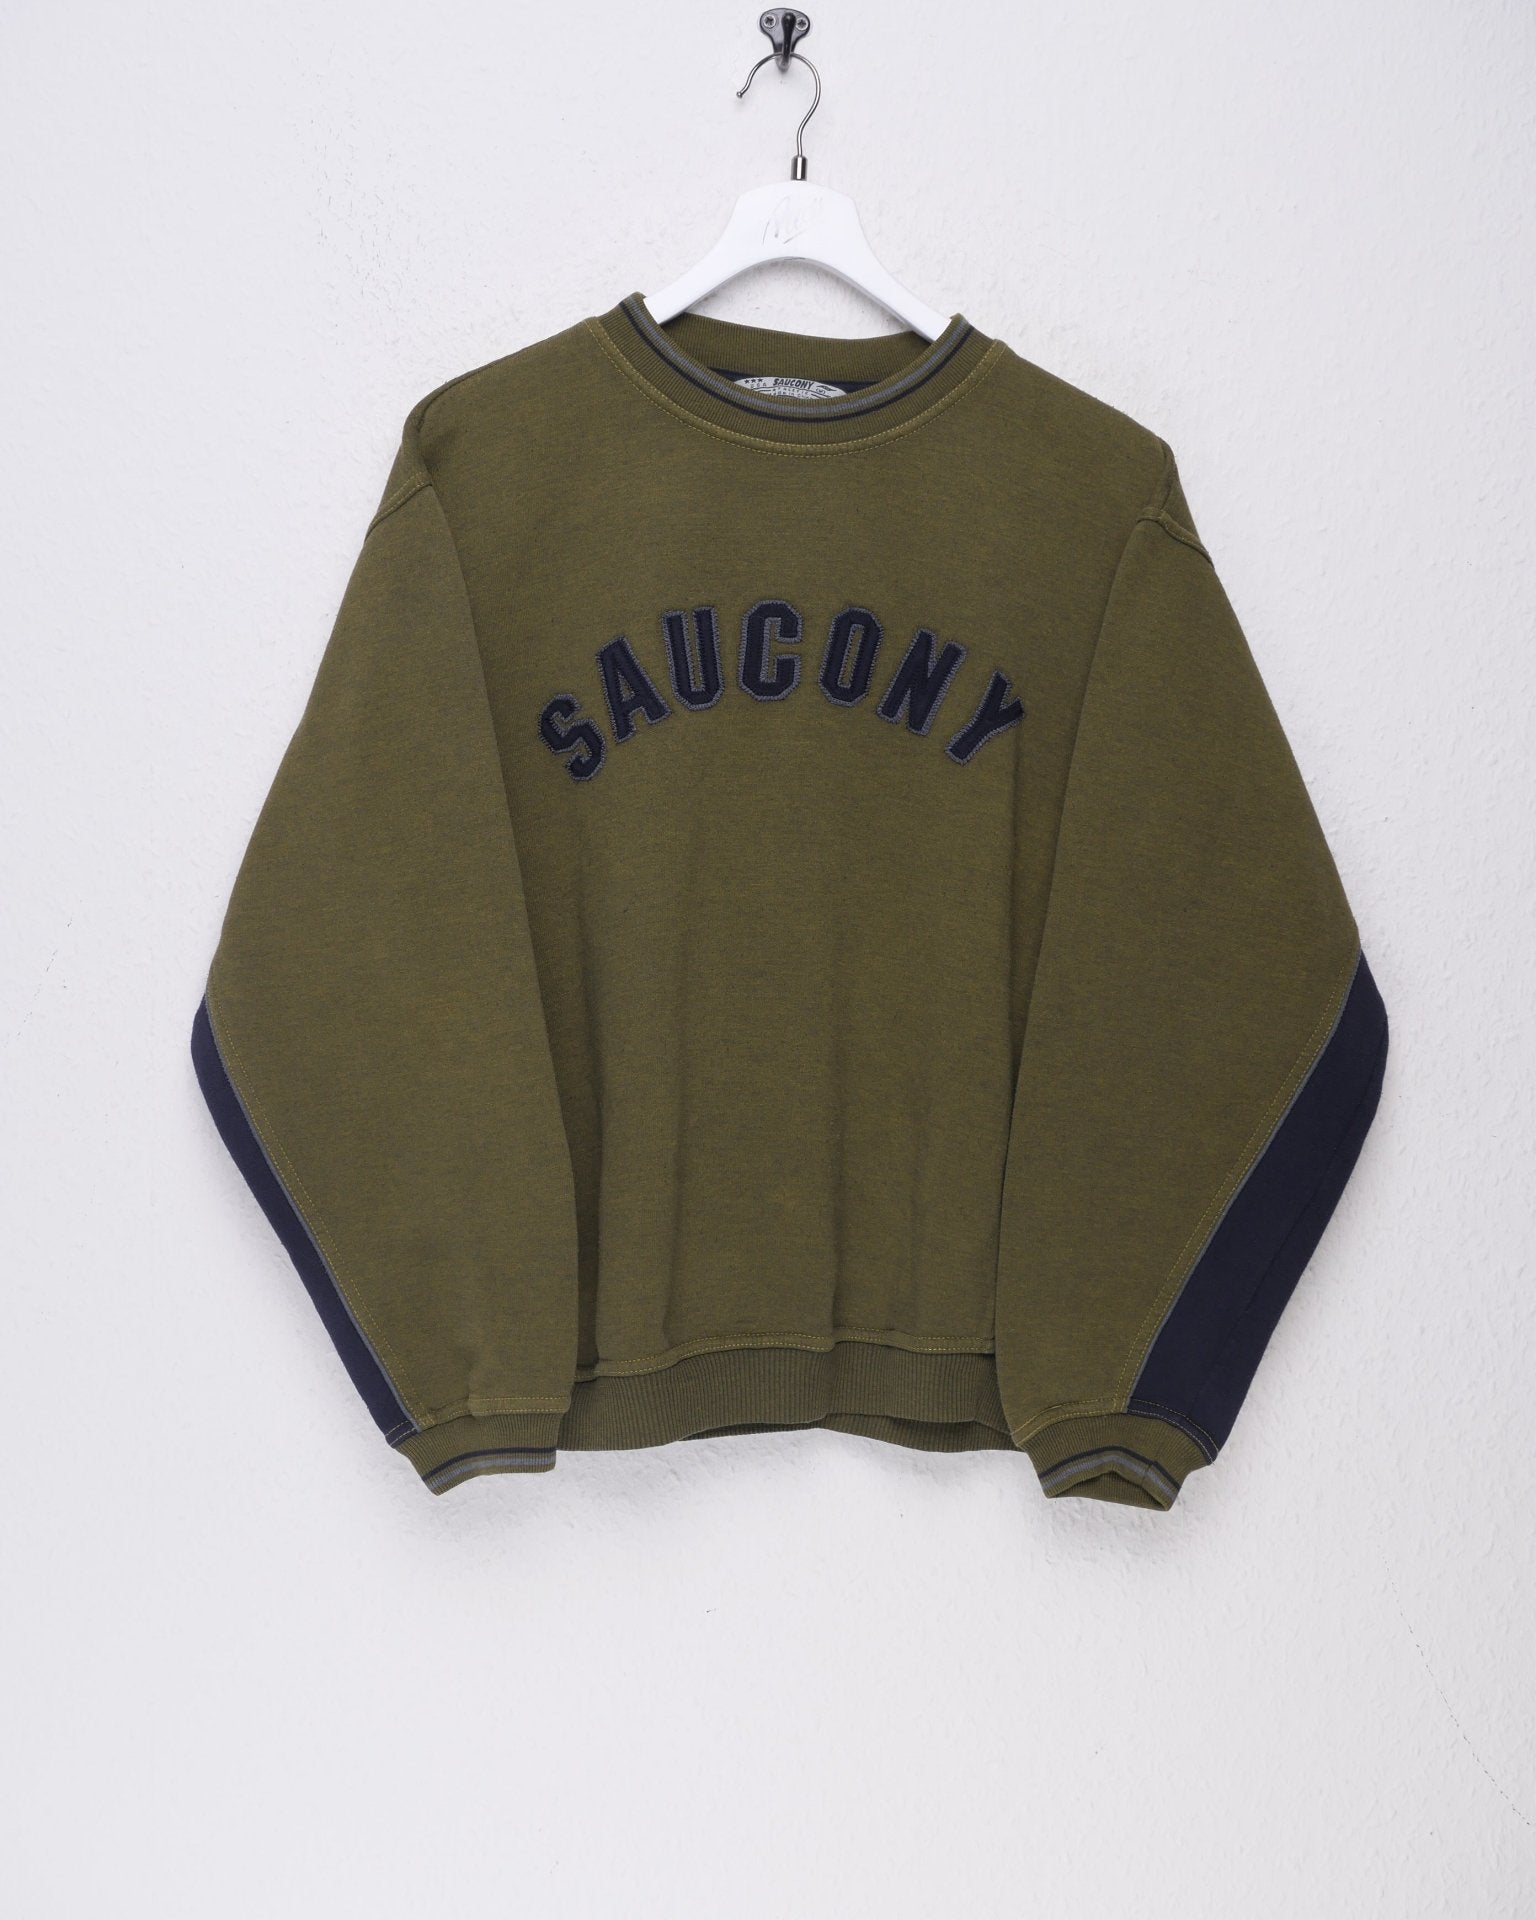 Saucony embroidered Spellout green Sweater - Peeces